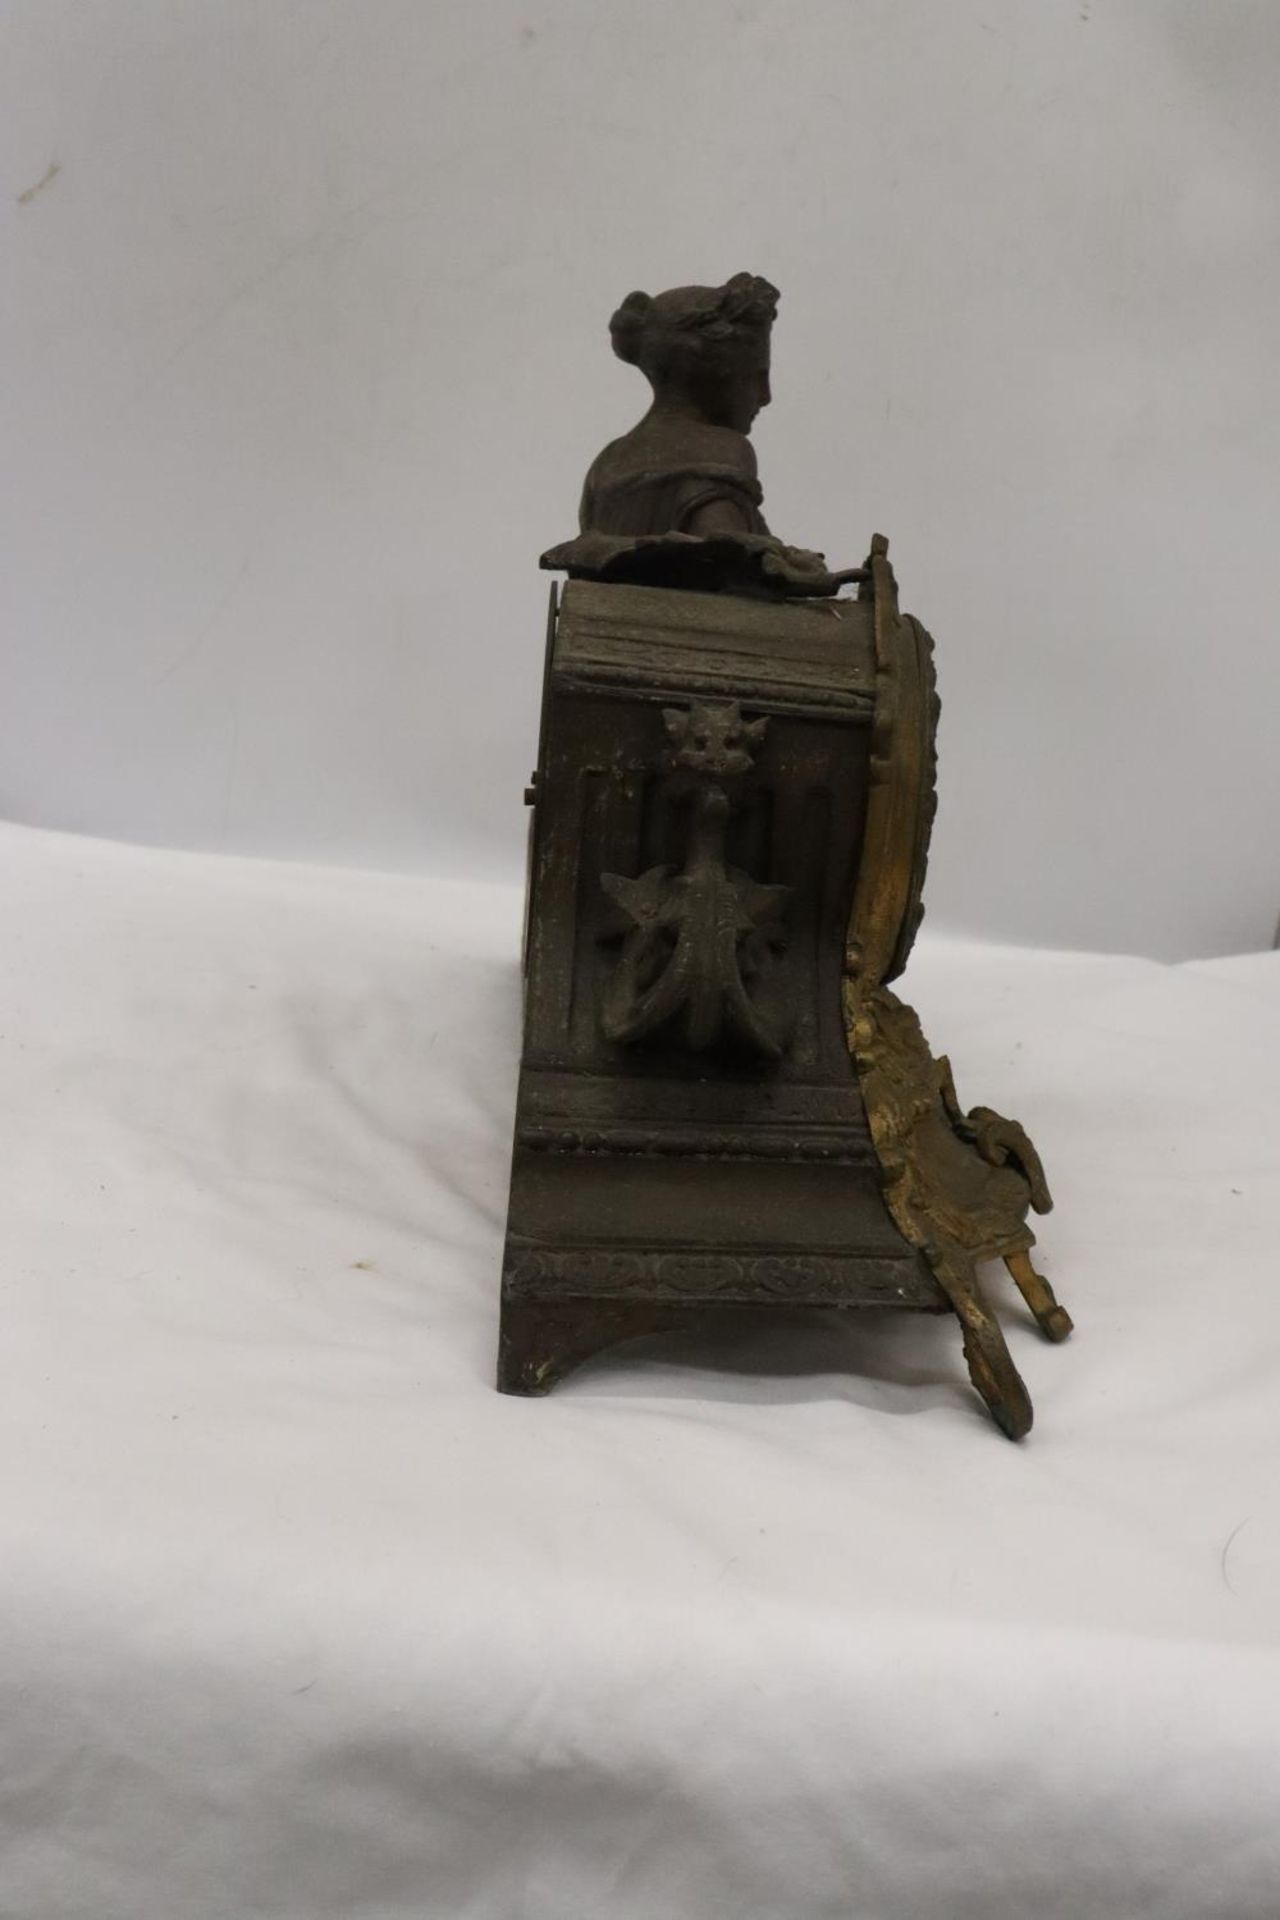 A VINTAGE ORNATE BRASS CLOCK WITH CLASSICAL FIGURE, HEIGHT 28CM, LENGTH 44CM - Image 3 of 6